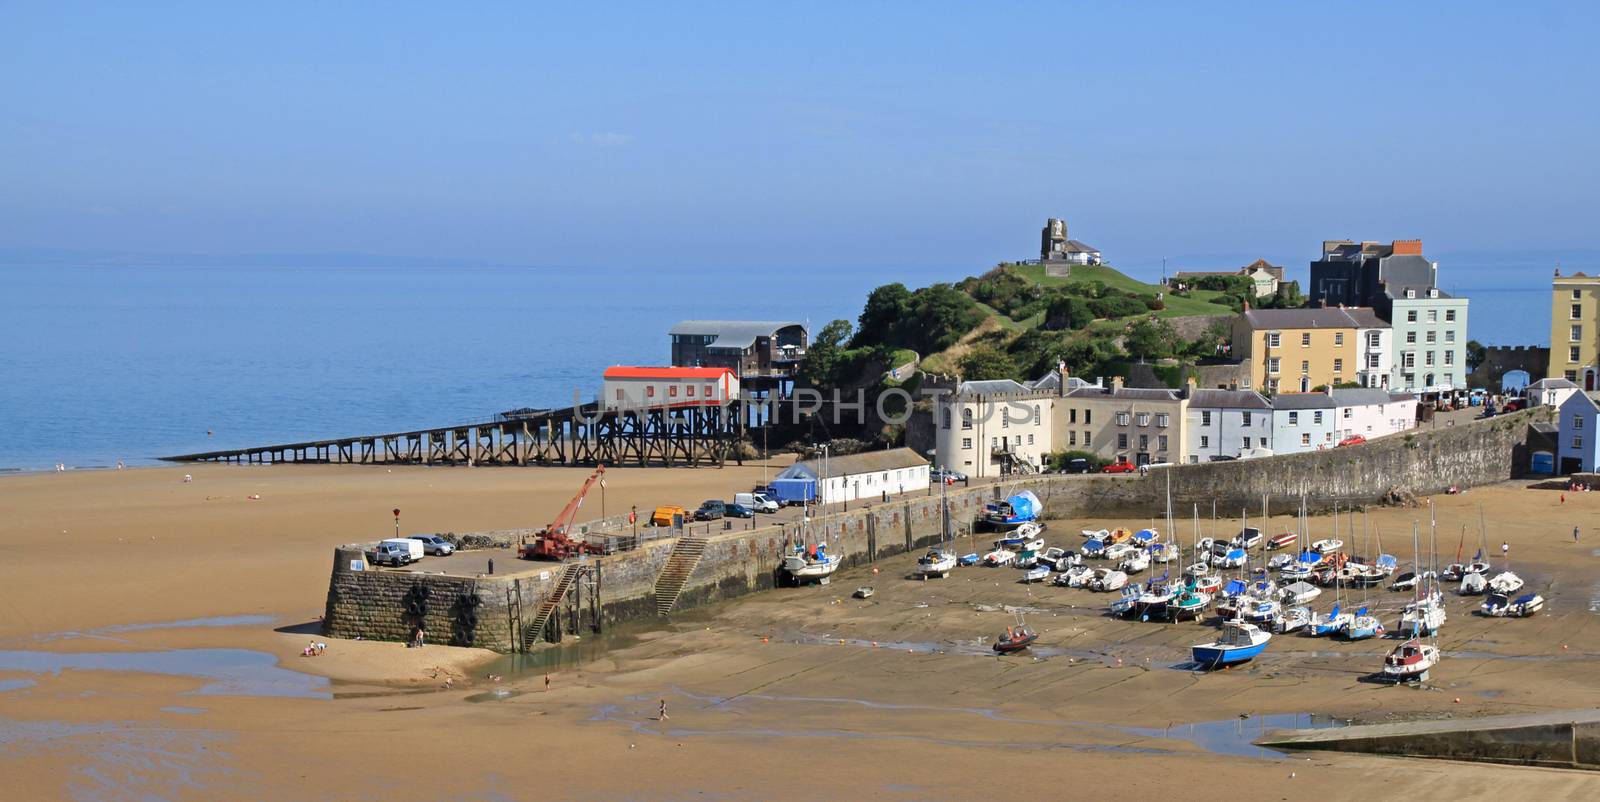 A view of Tenby harbour, in south Wales, with colourful, pastel houses overlooking the beach and sea, with the tide out